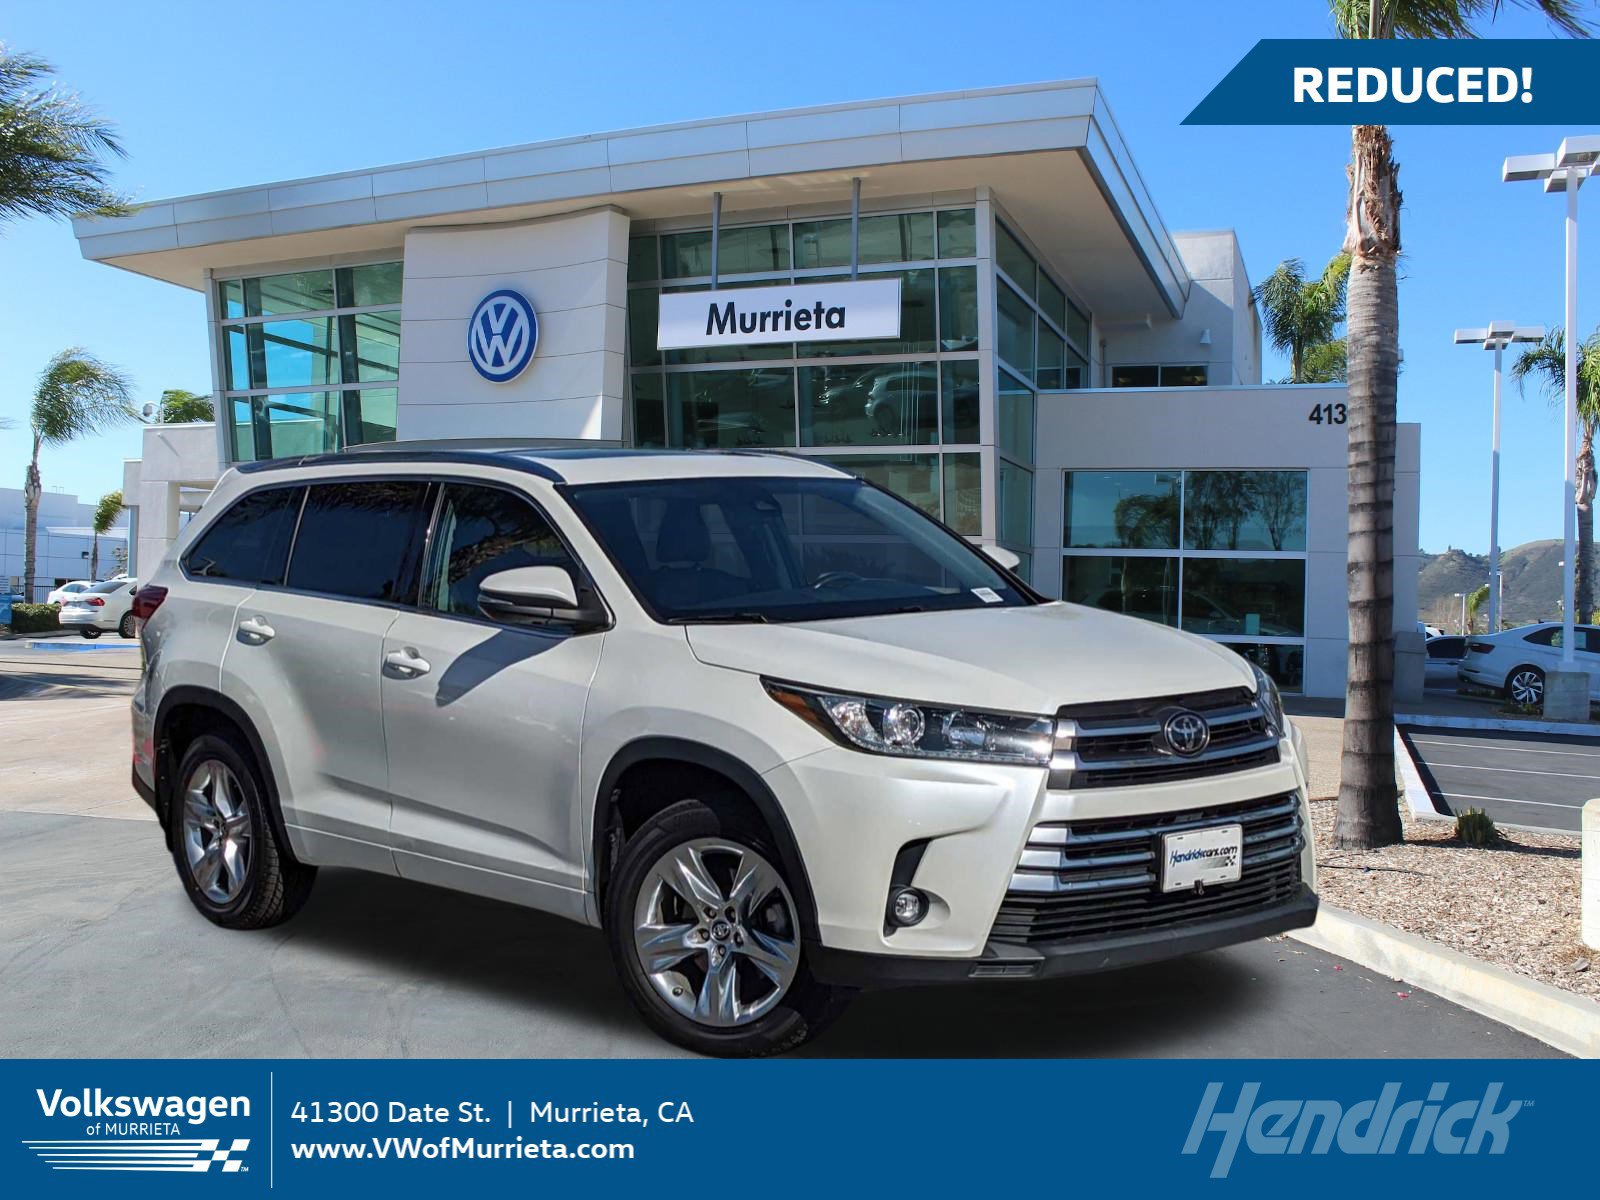 New Toyota Highlander for Sale in Temecula, CA